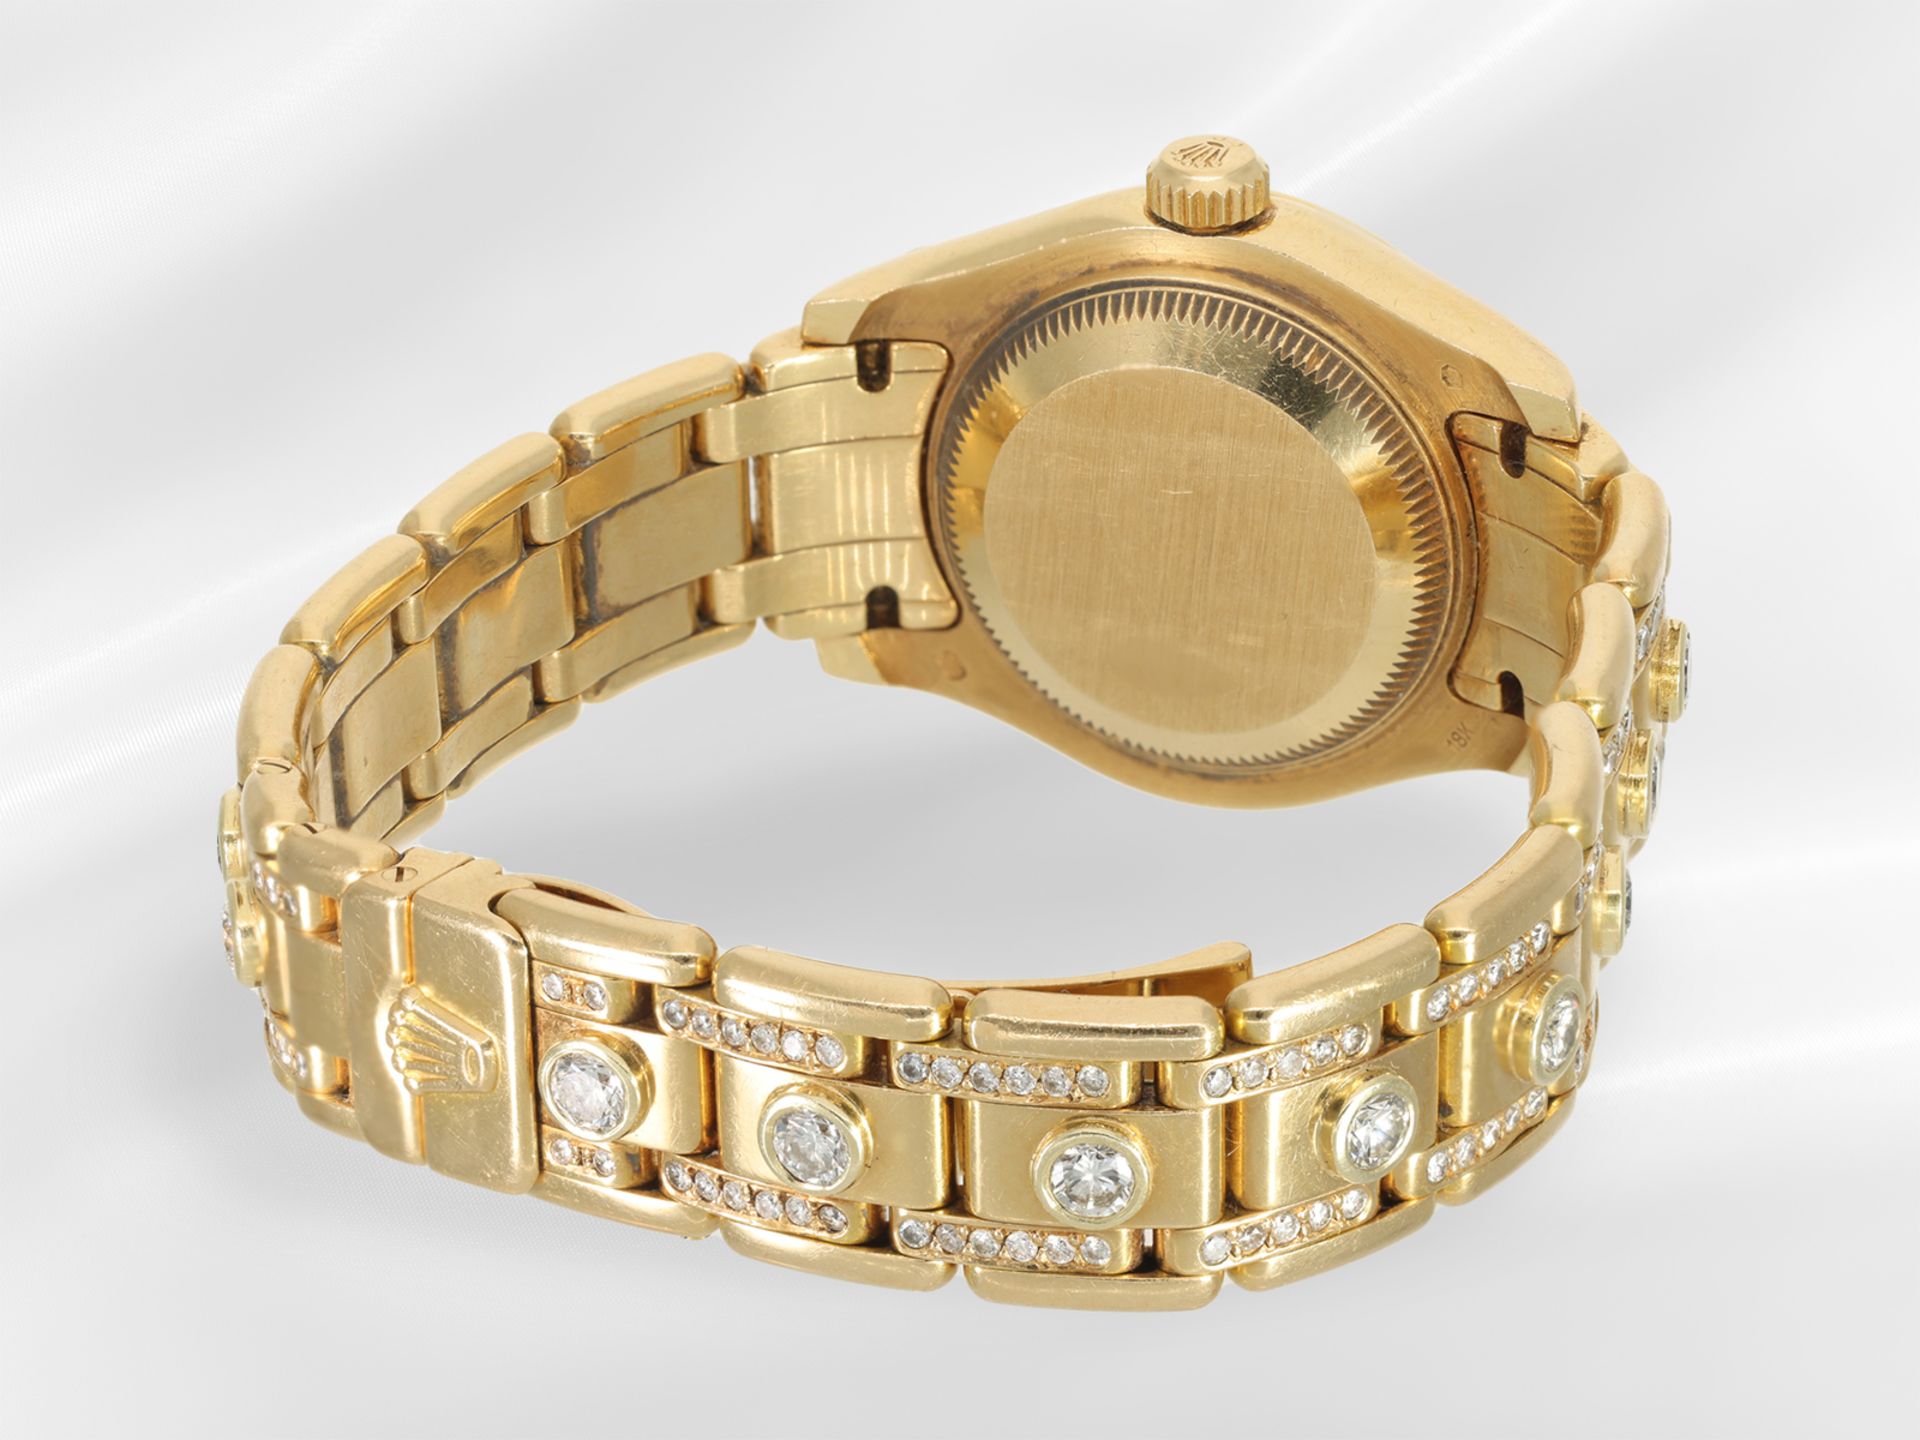 Wristwatch: wanted luxury ladies' watch Rolex Pearlmaster Ref.....with full brilliant-cut diamonds a - Image 6 of 6